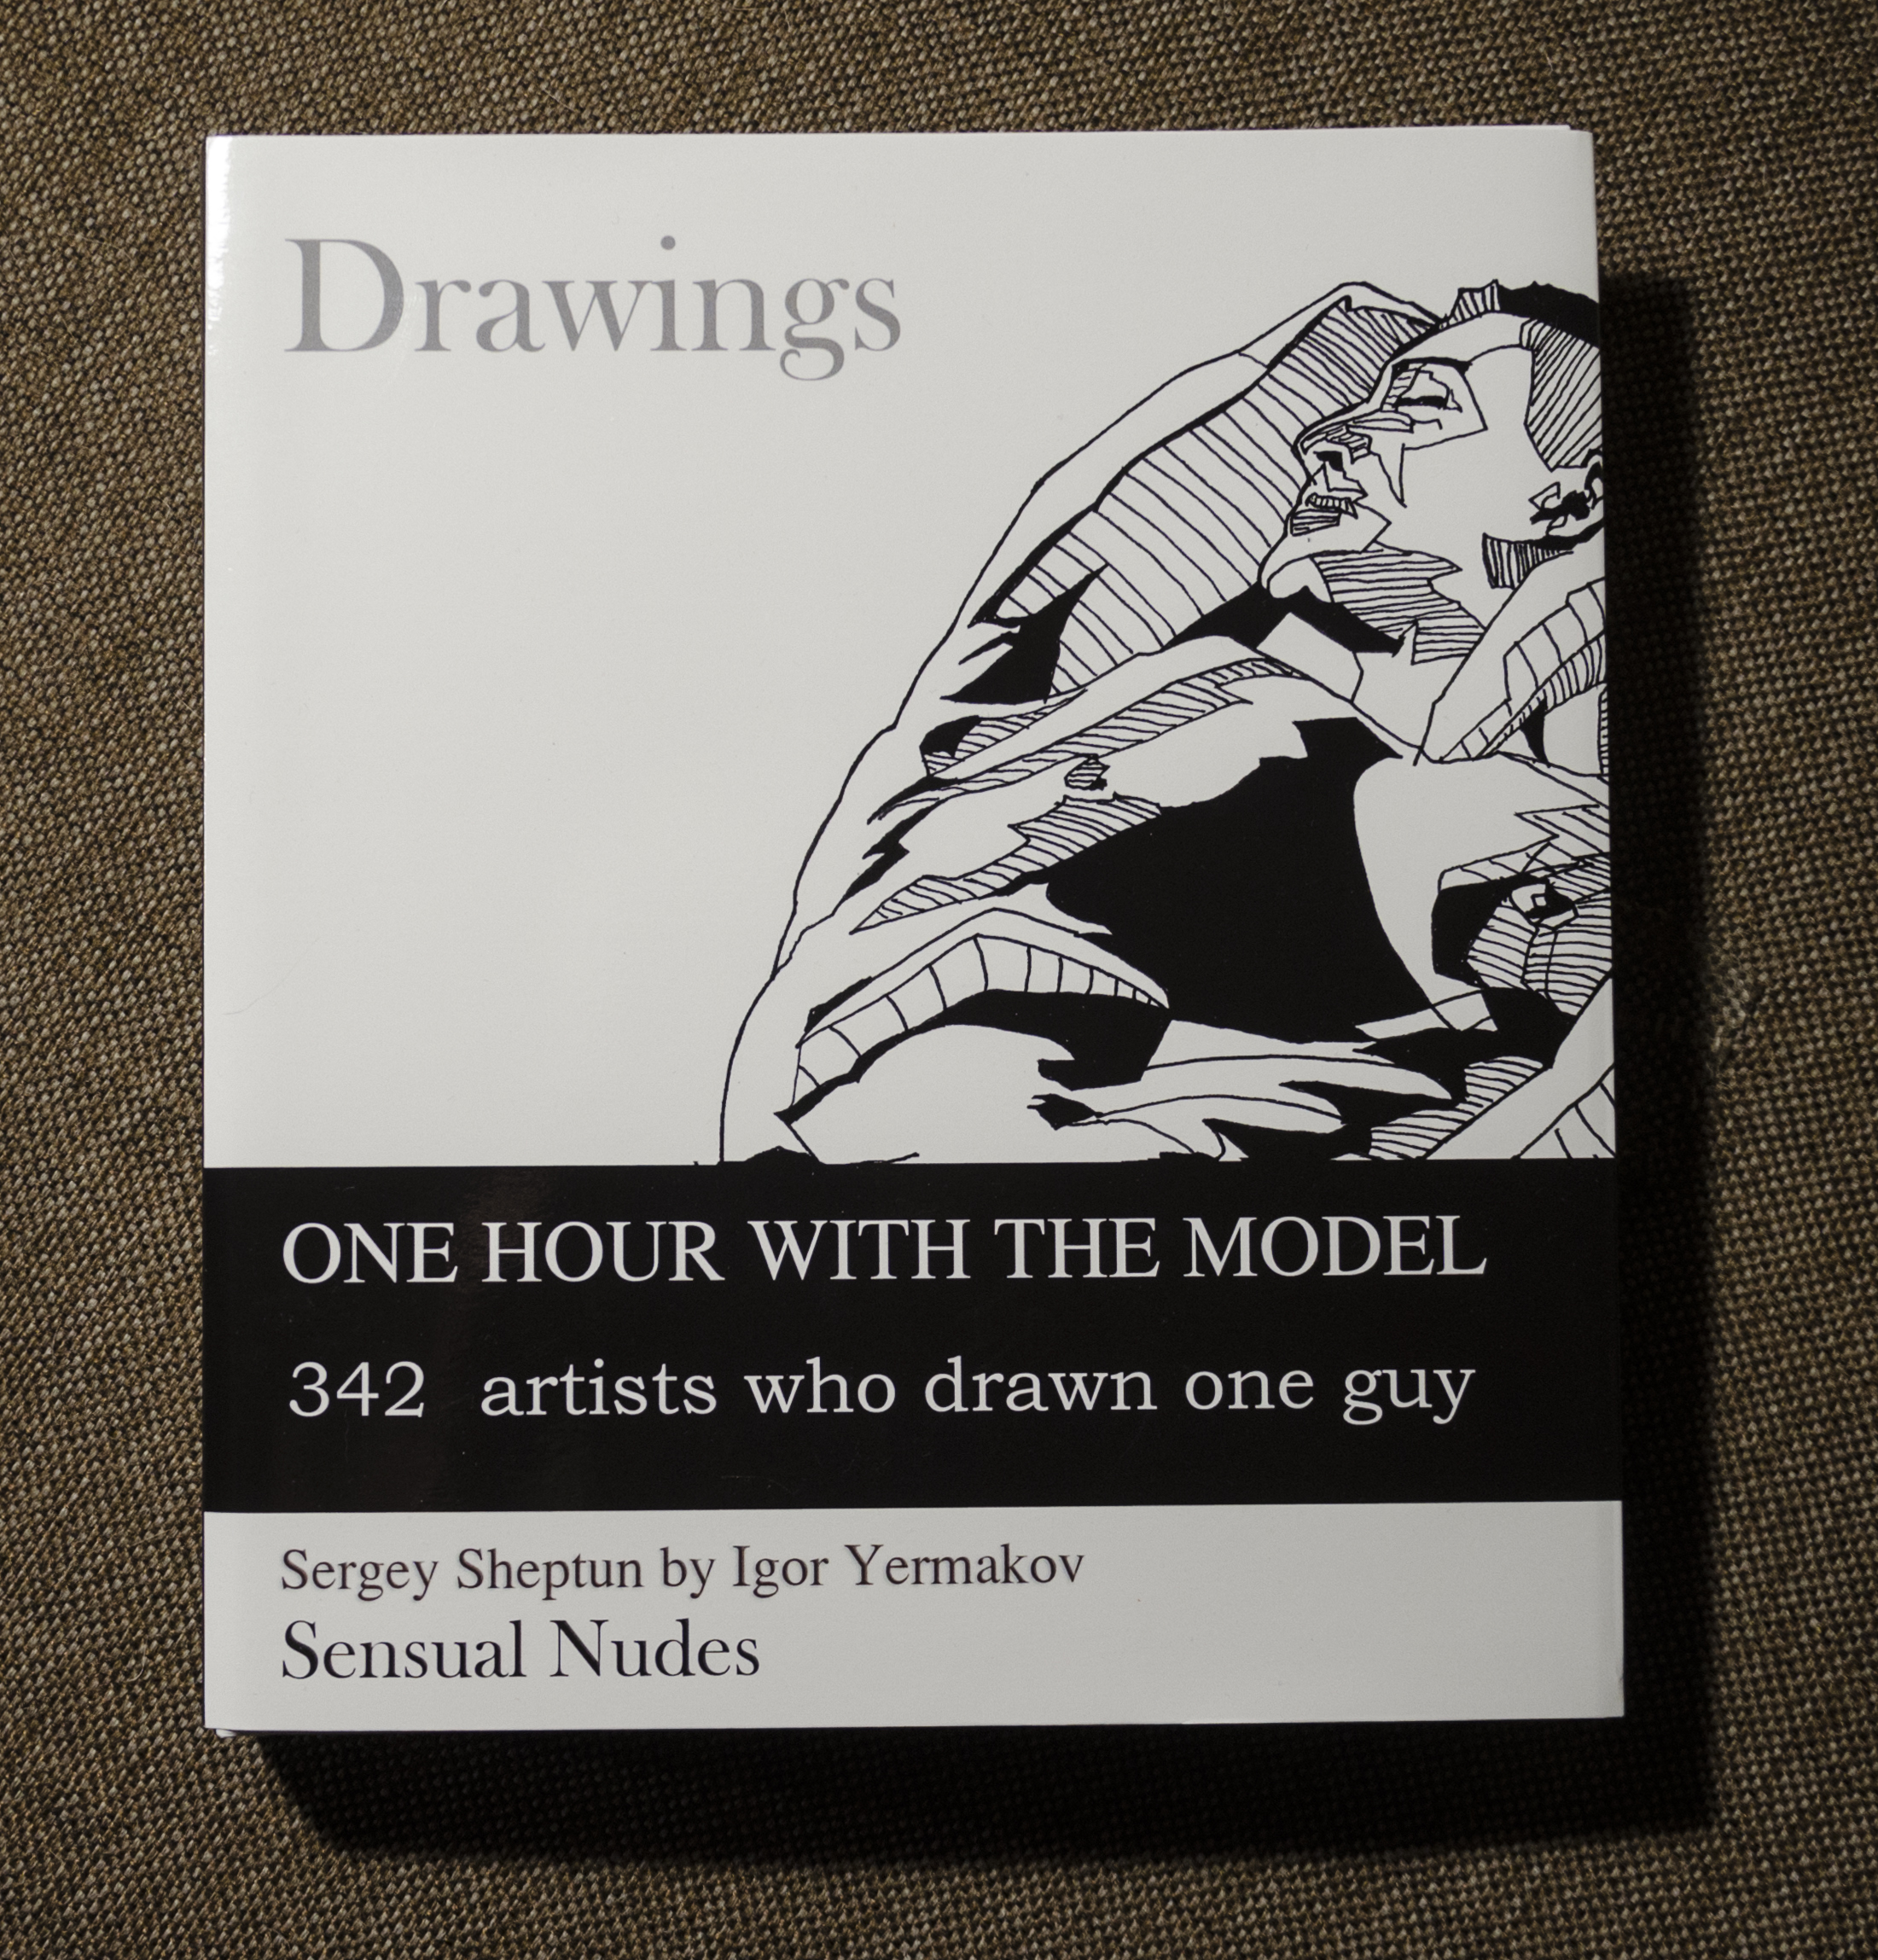 Draw Book “One Hour With The Model”, Third Edition